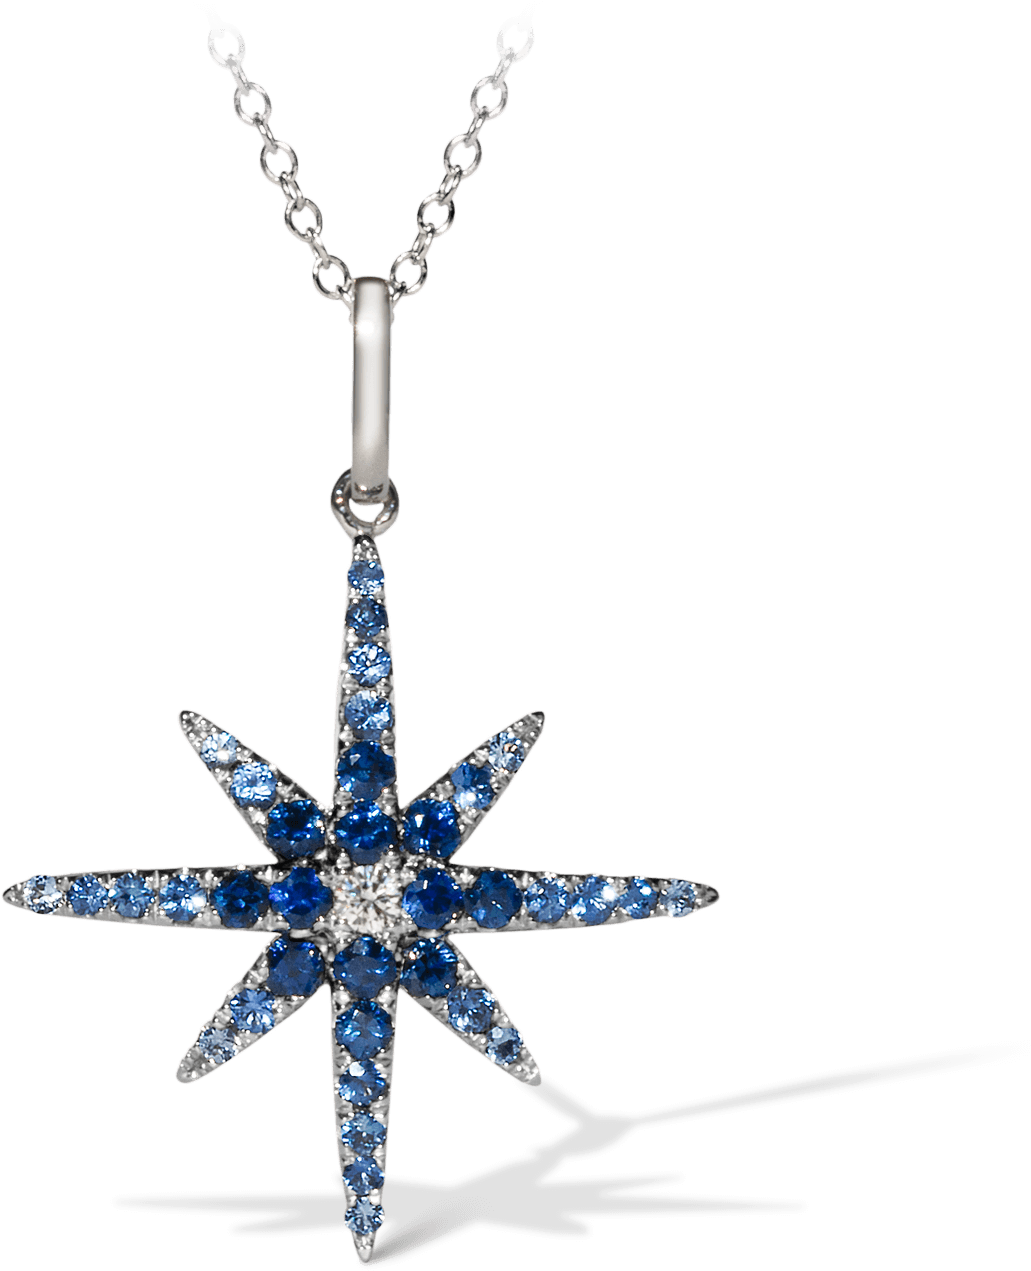 Stunning Compass Pendant In Blue - Tattoo Design Star Tribal, Hd Png Download